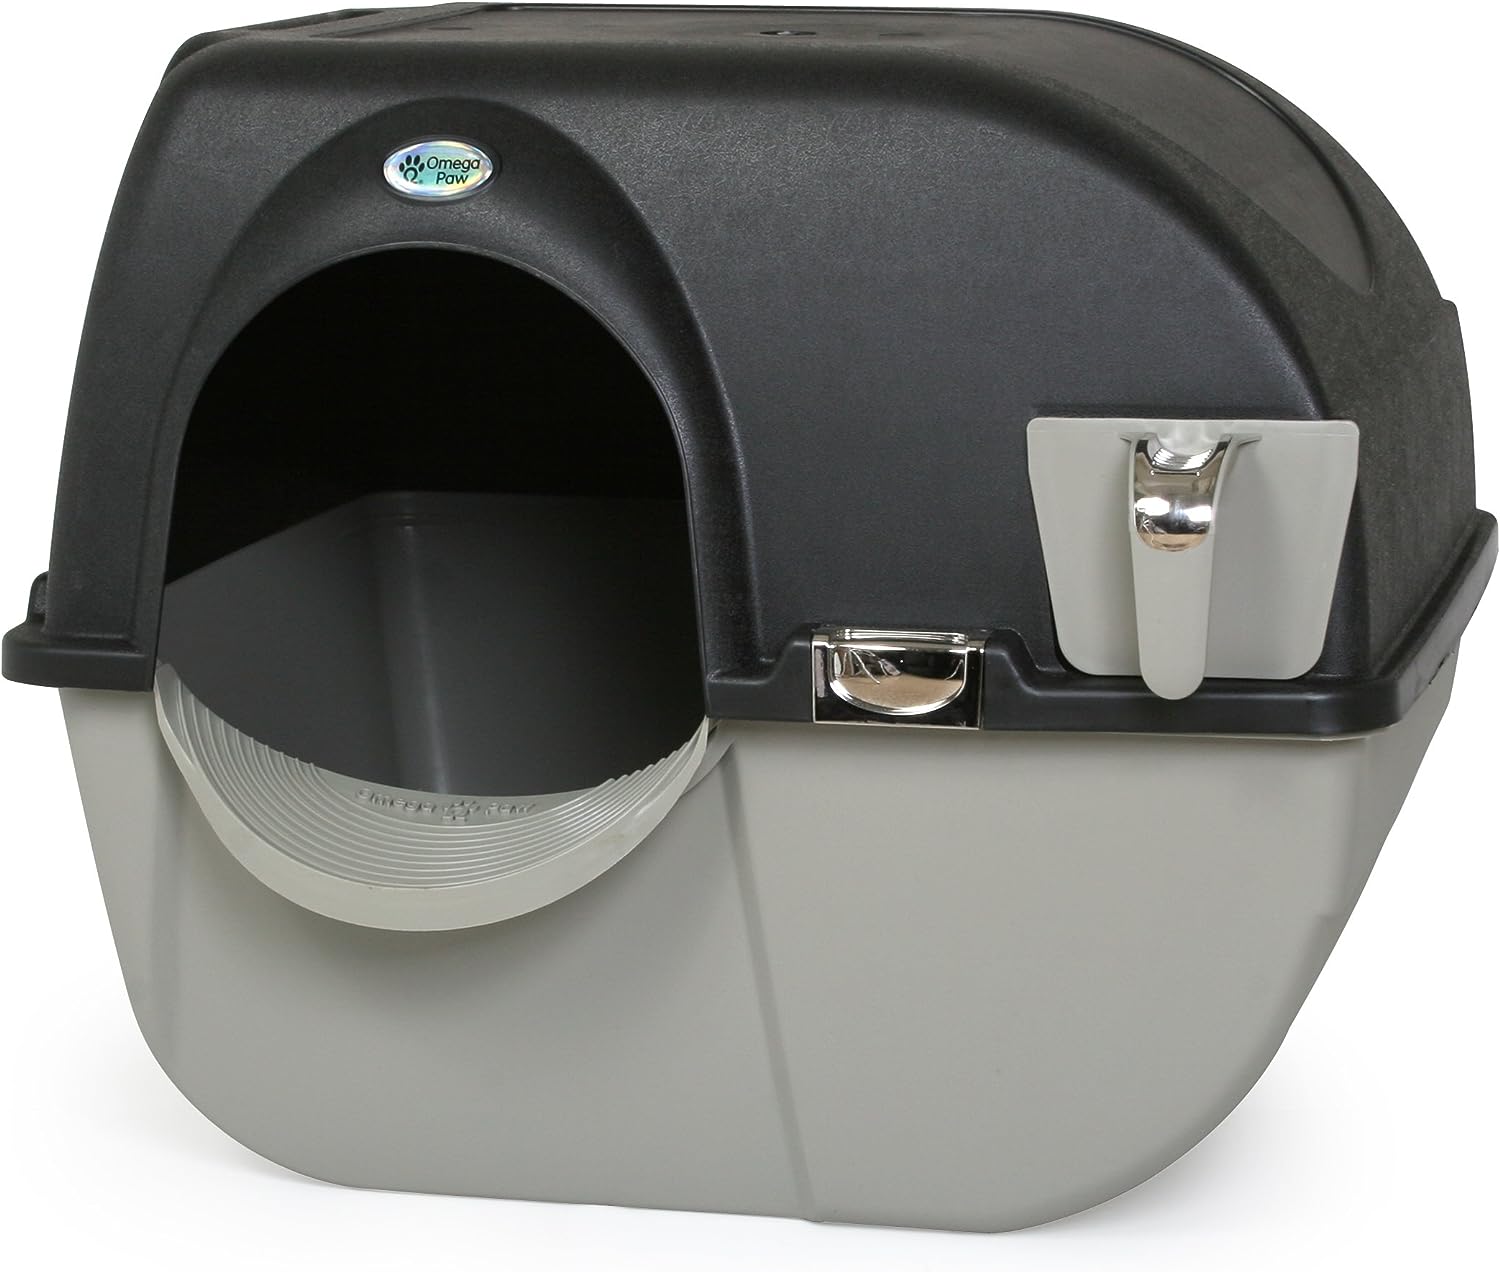 Omega Paw Elite Self Cleaning Litter Box Large EL-RA20-1 Review